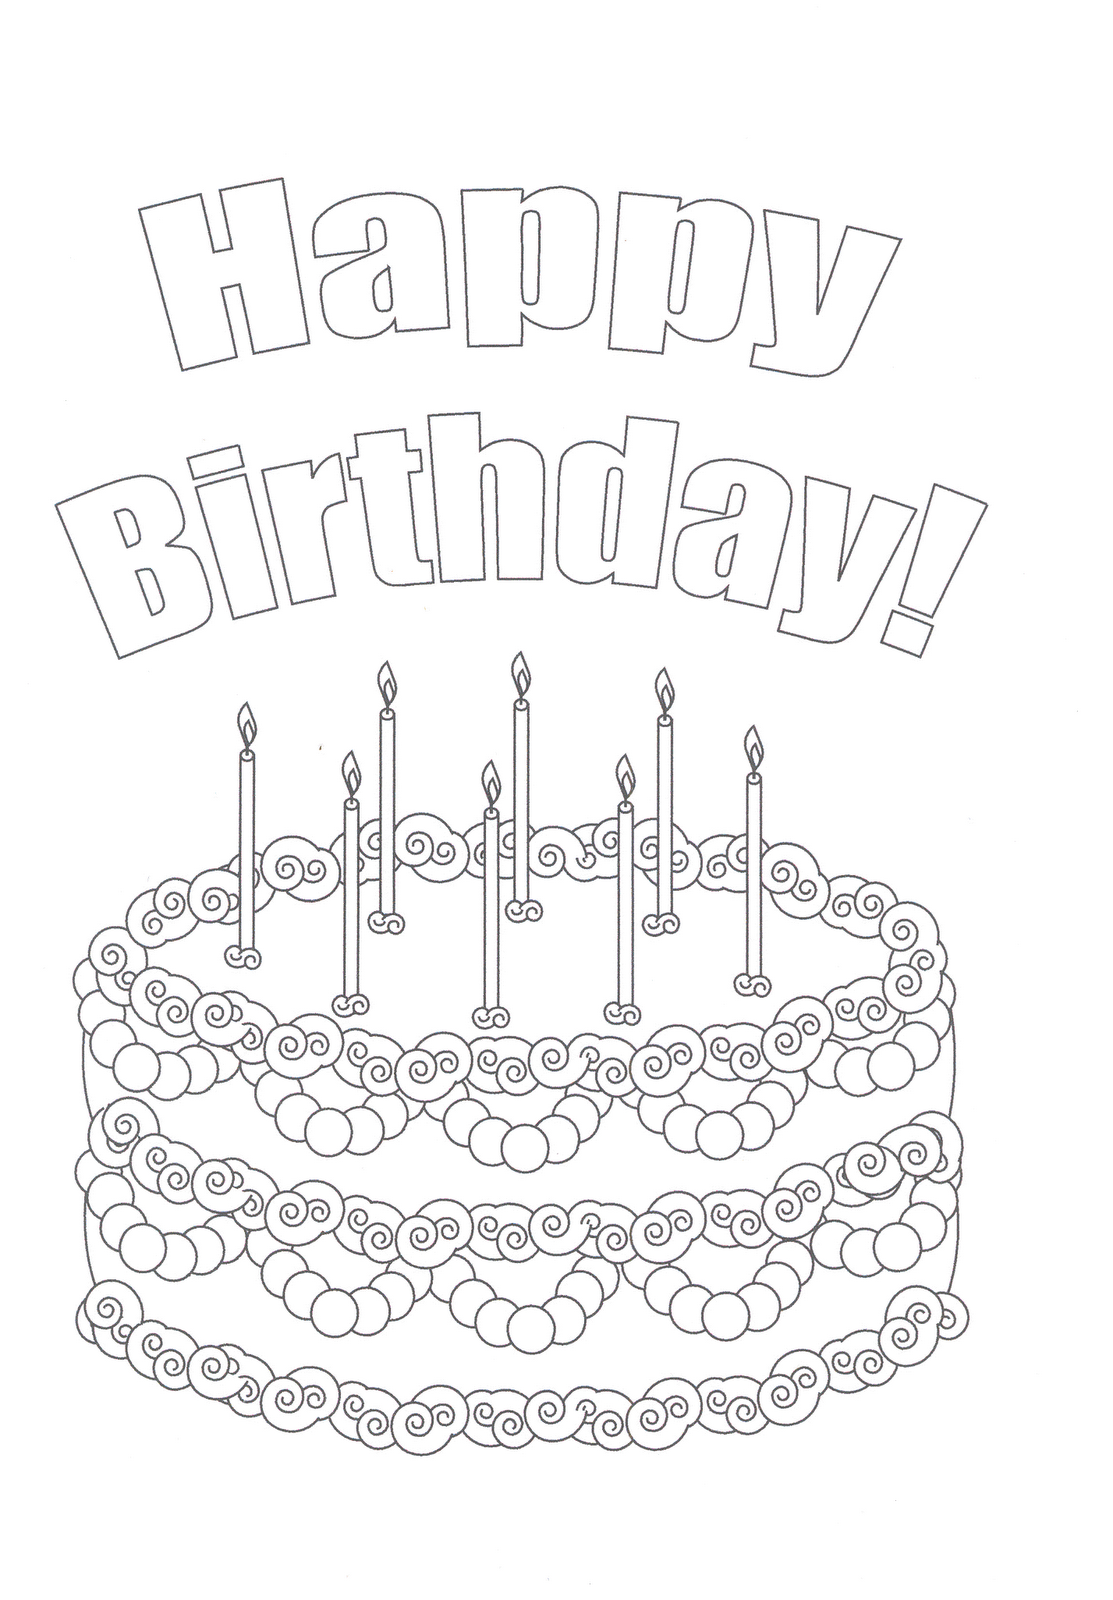 Cafofodamoda 8th Birthday Coloring Pages June